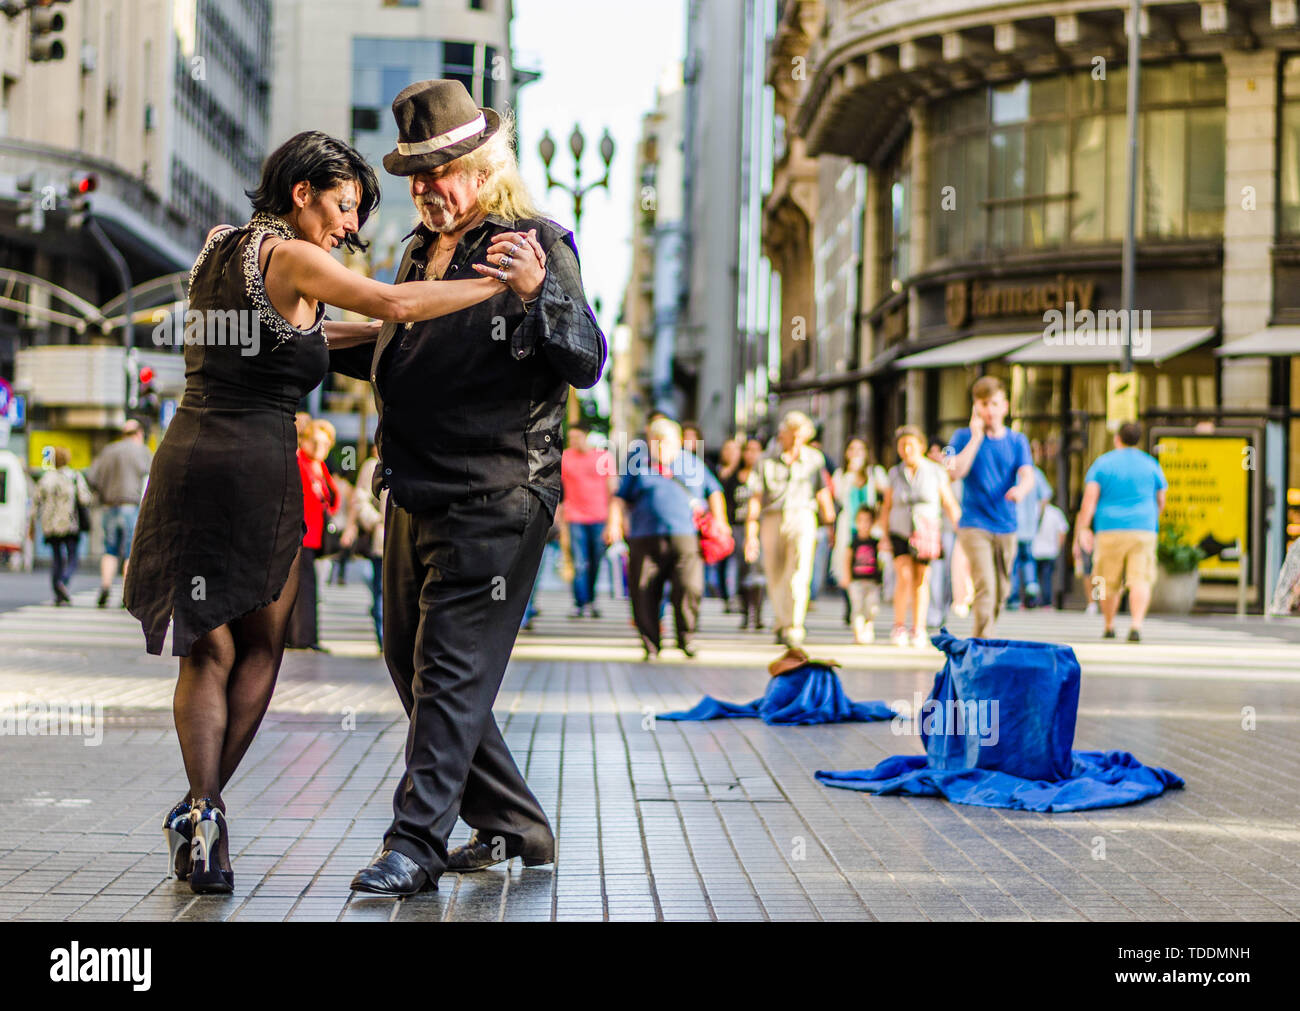 Buenos Aires, Argentina - March 11, 2016: Tango dancers in Buenos Aires  Stock Photo